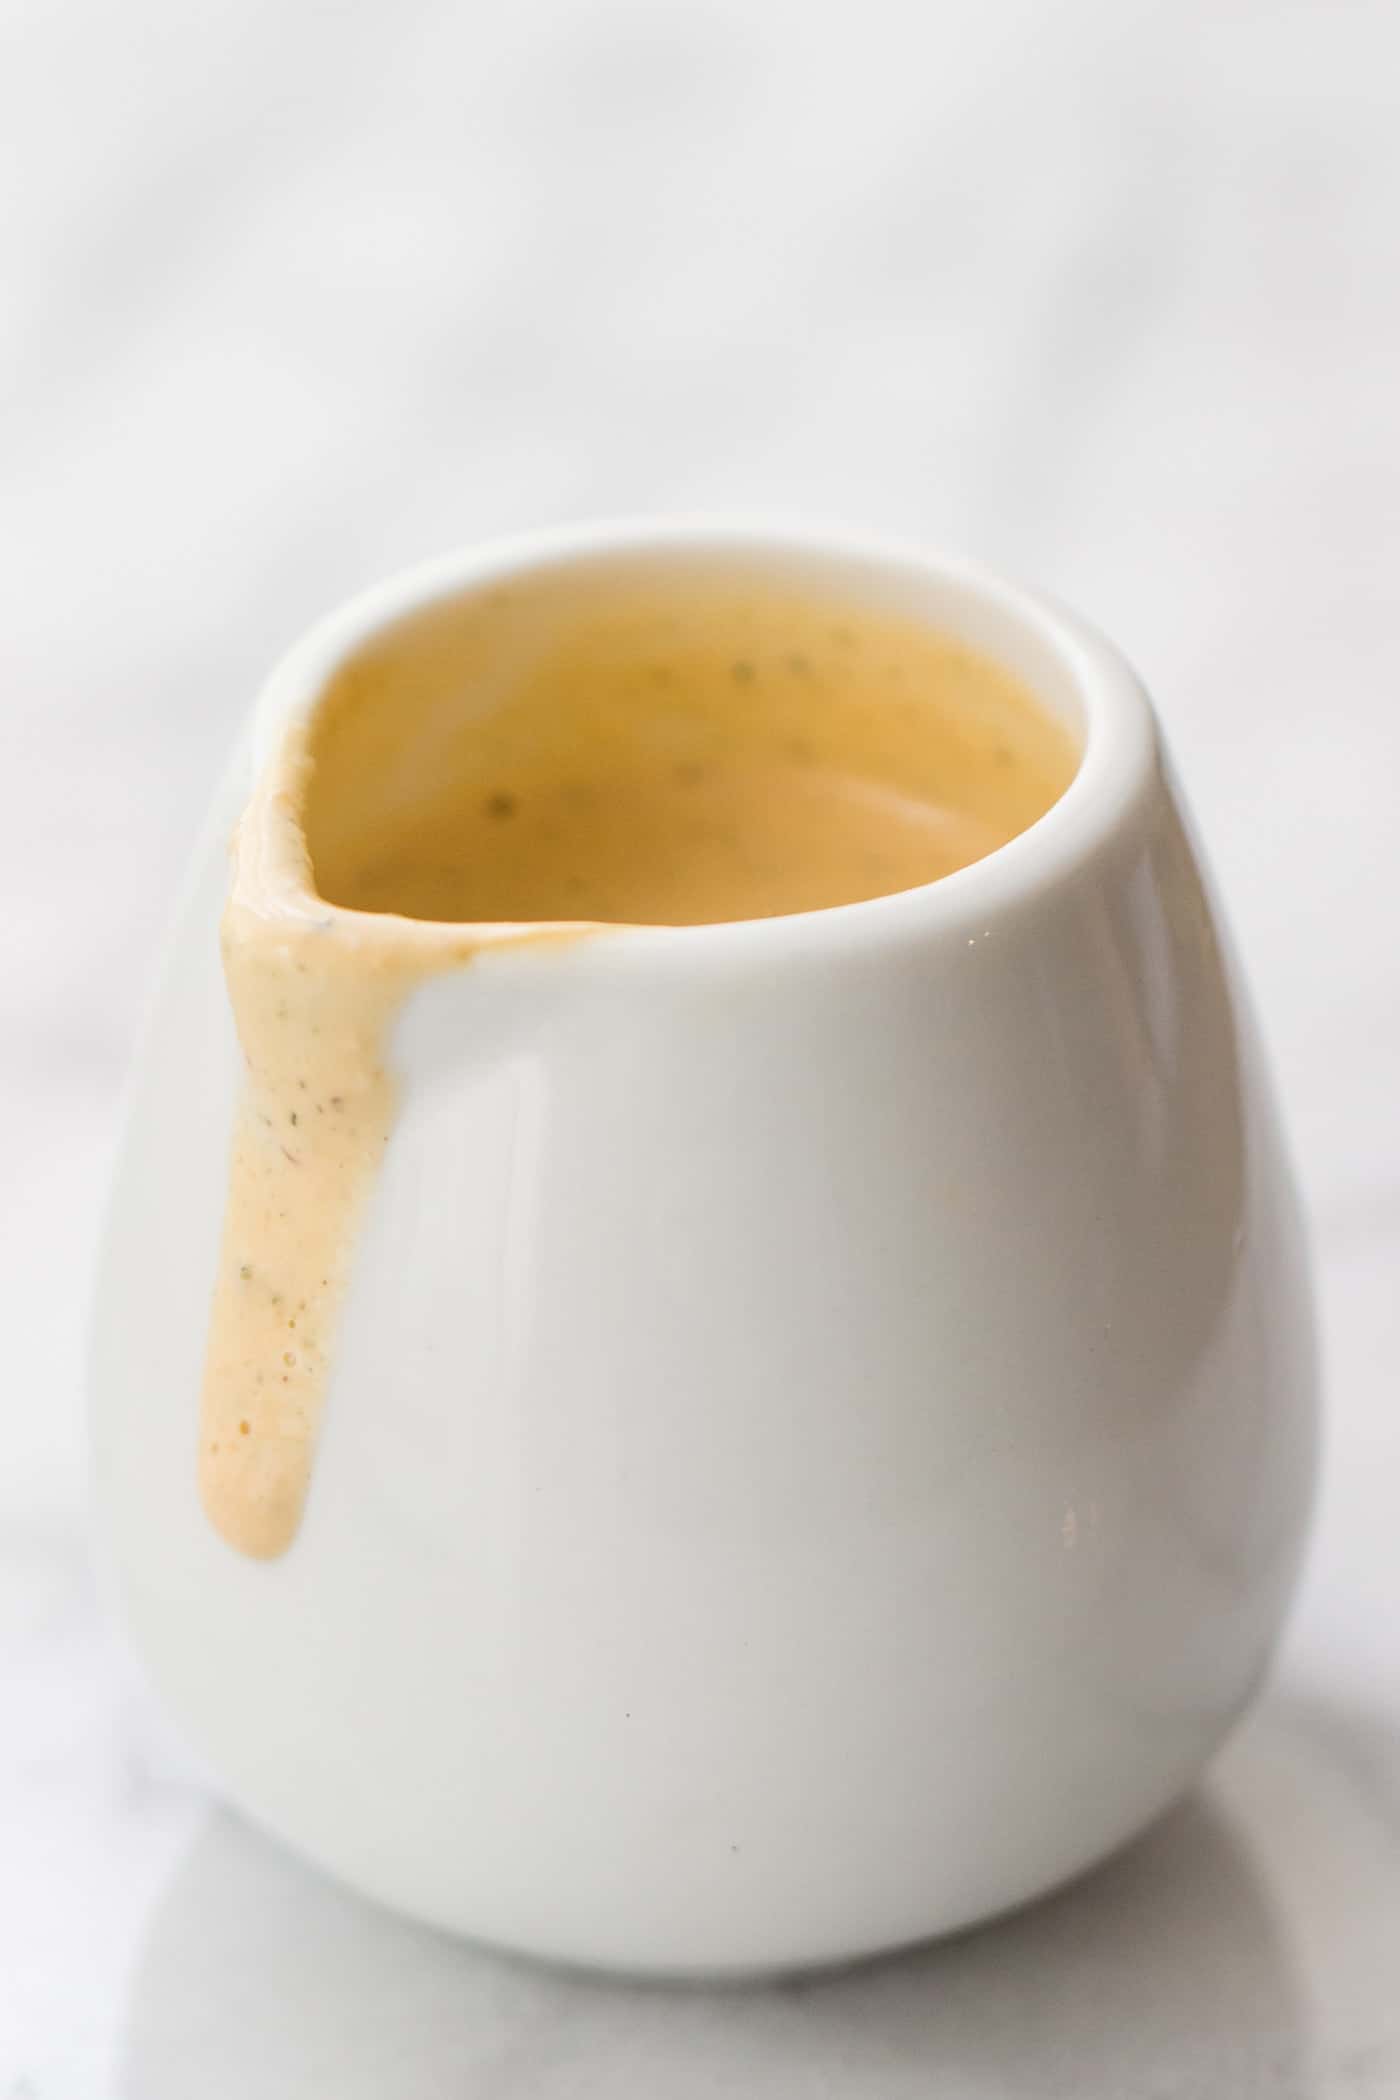 CREAMY MISO GINGER SAUCE -- made with tahini, hemp seeds, hot sauce, ginger and miso!